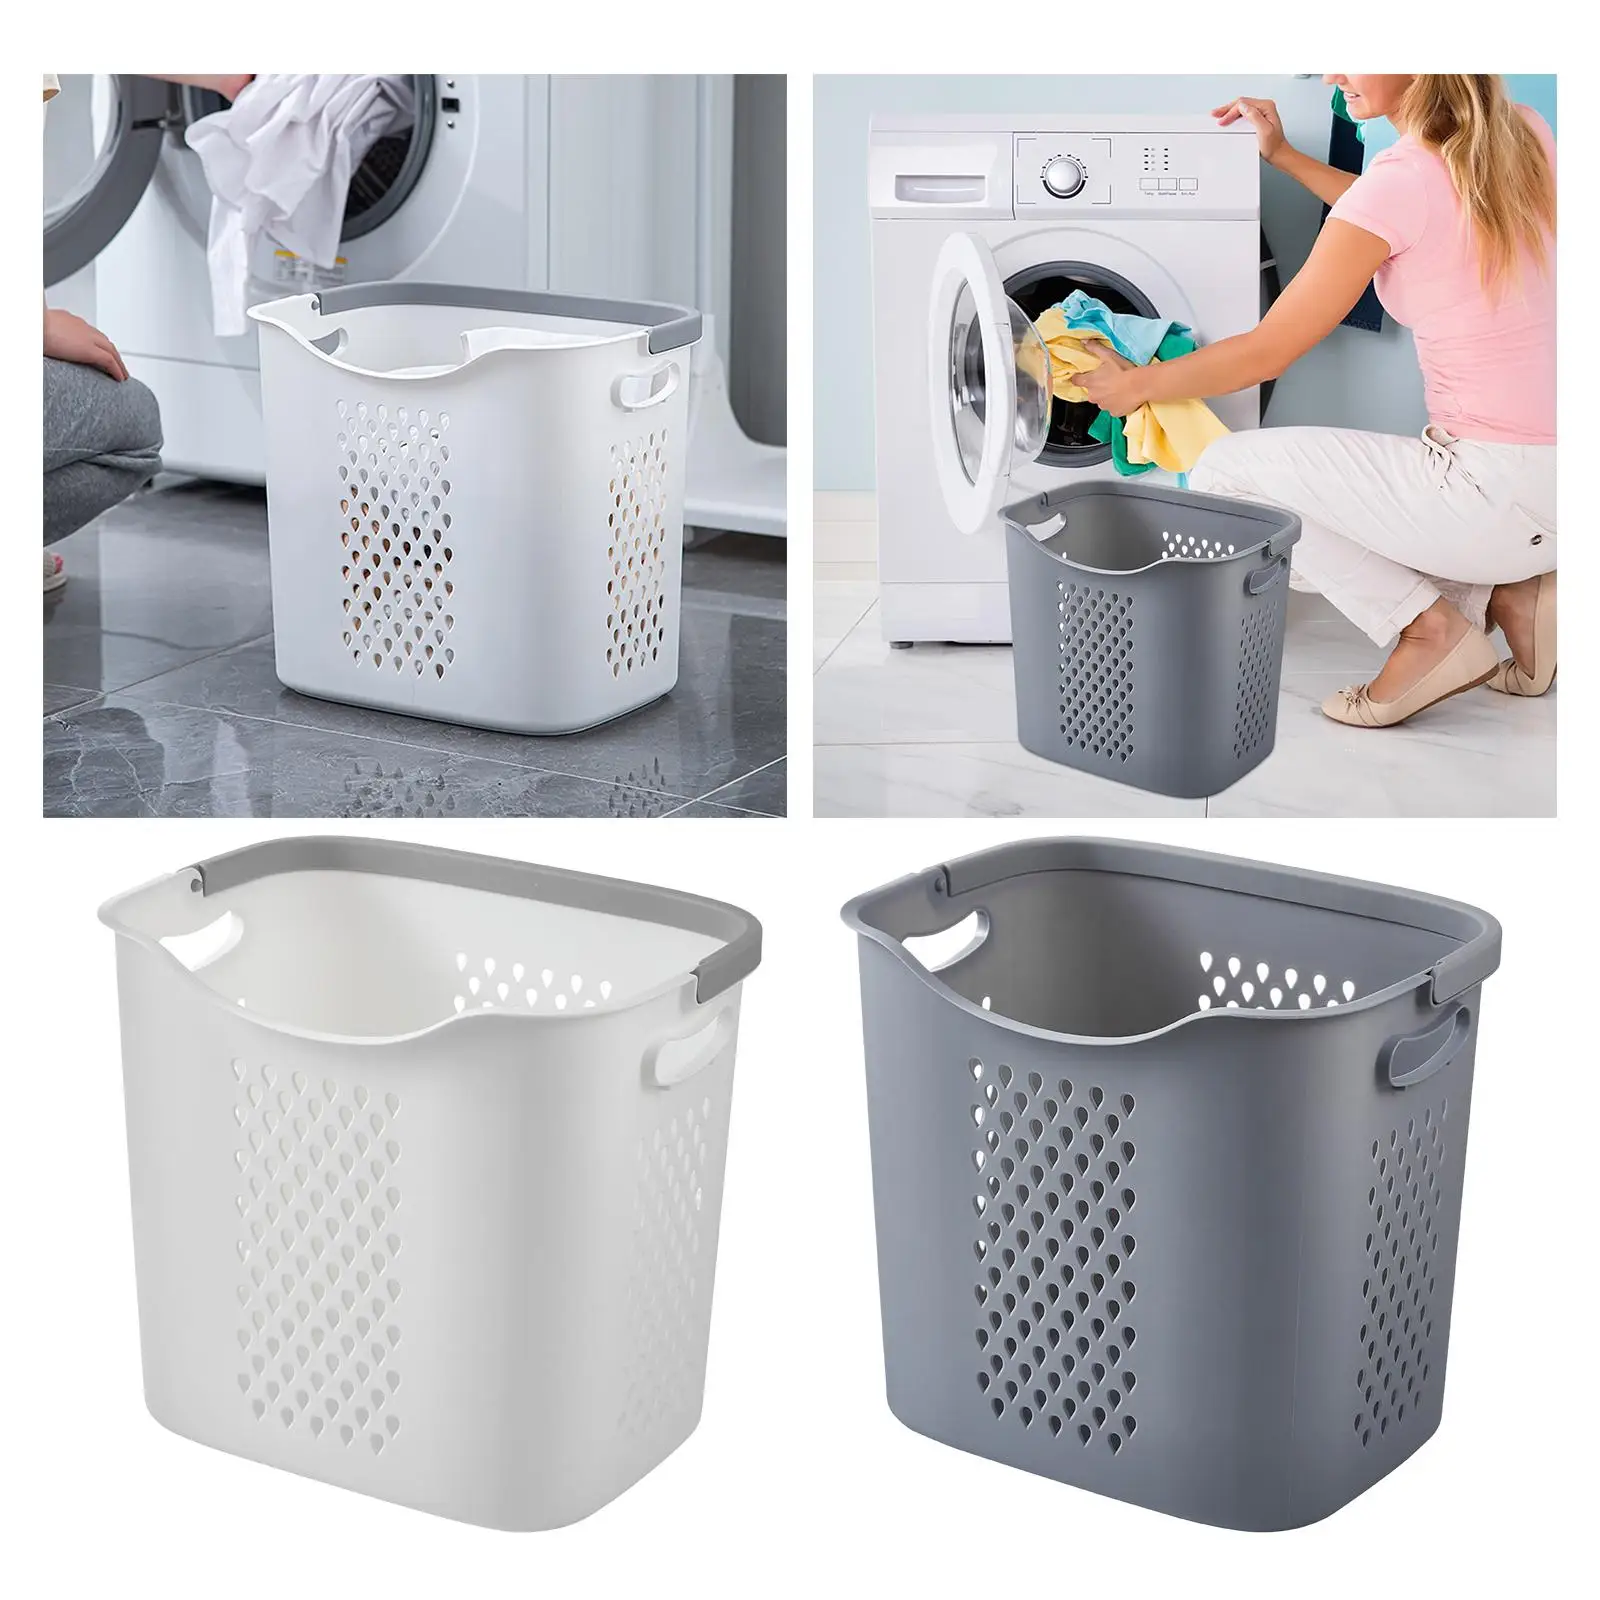 Household Laundry Basket Bucket Organizer Toy Storage Bins Organizer Multifunctional for Living Room Dorm Dirty Clothes Pans